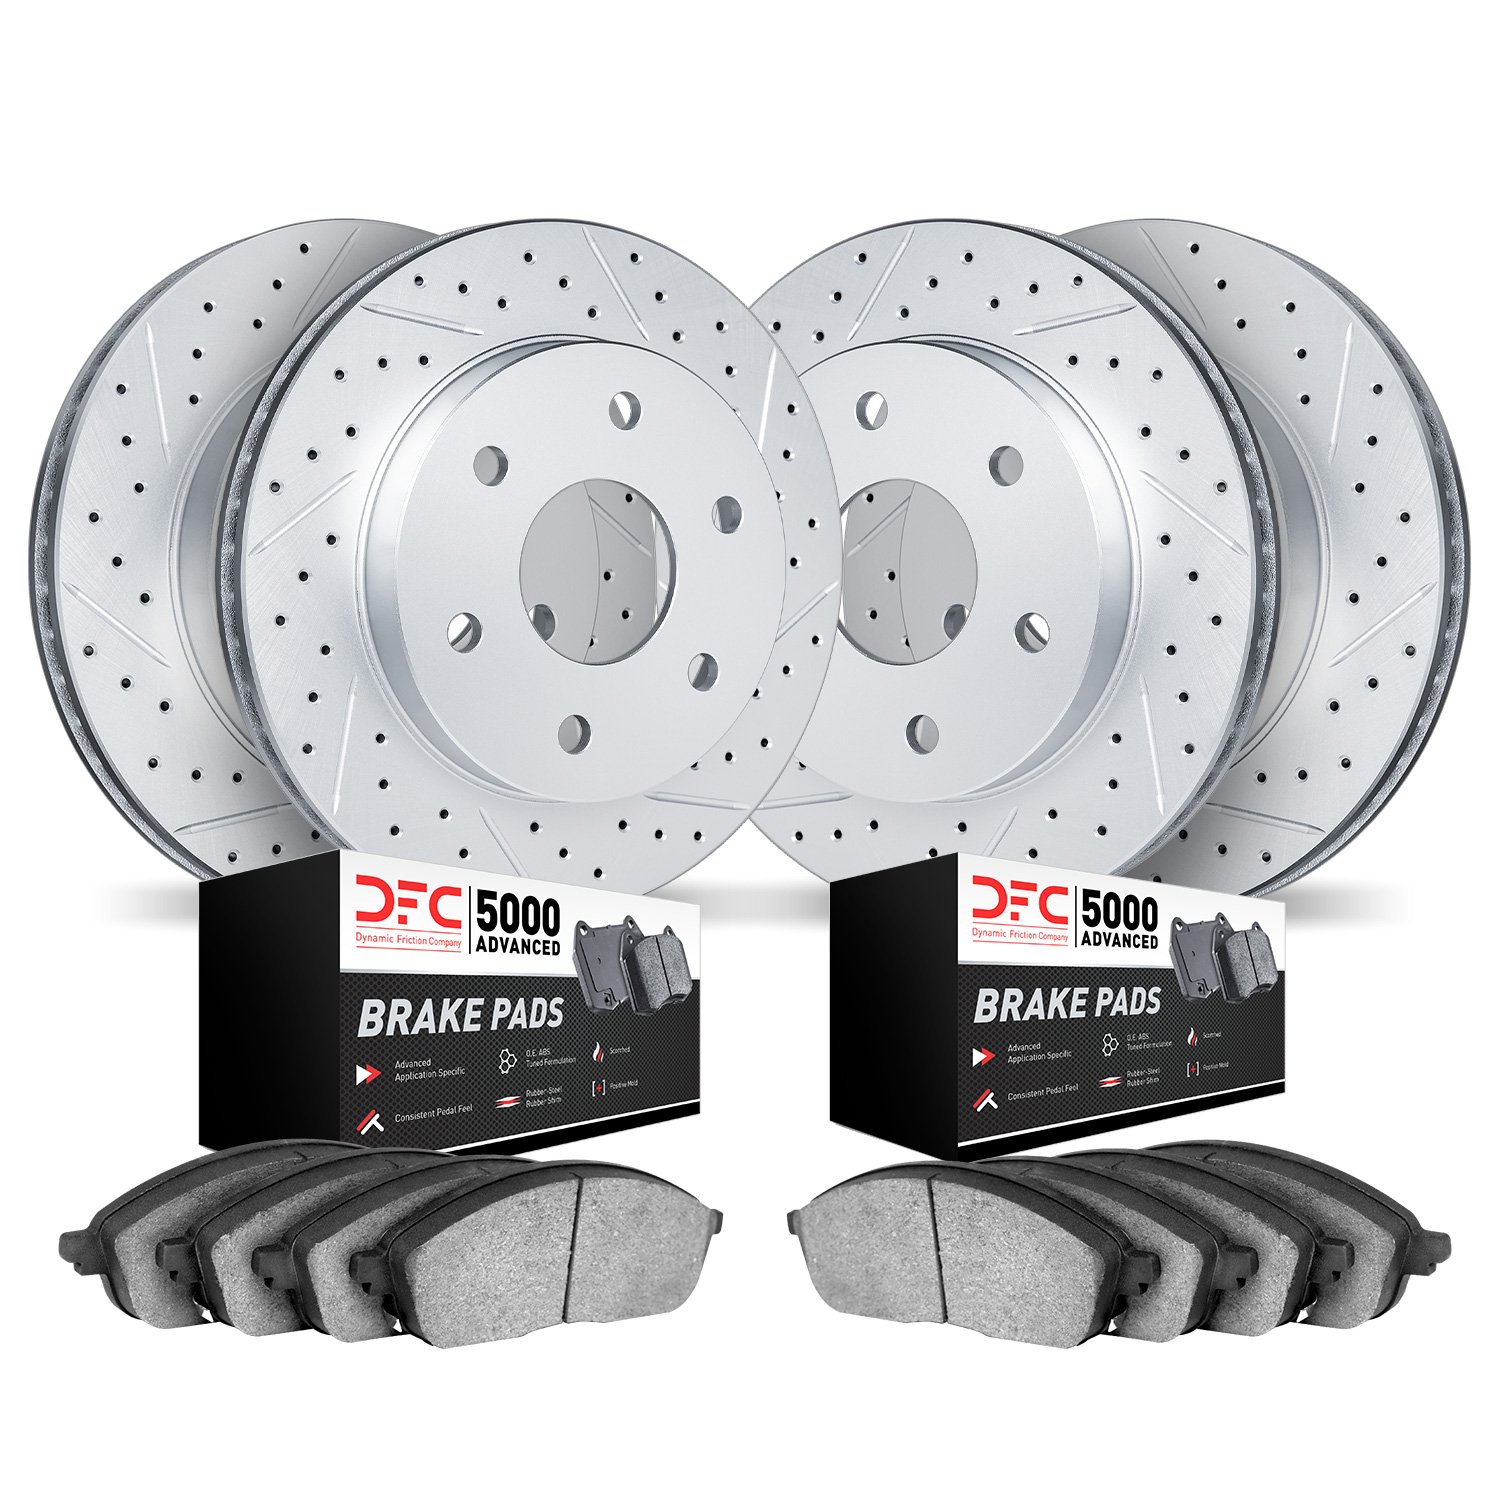 2504-54320 Geoperformance Drilled/Slotted Rotors w/5000 Advanced Brake Pads Kit, Fits Select Ford/Lincoln/Mercury/Mazda, Positio